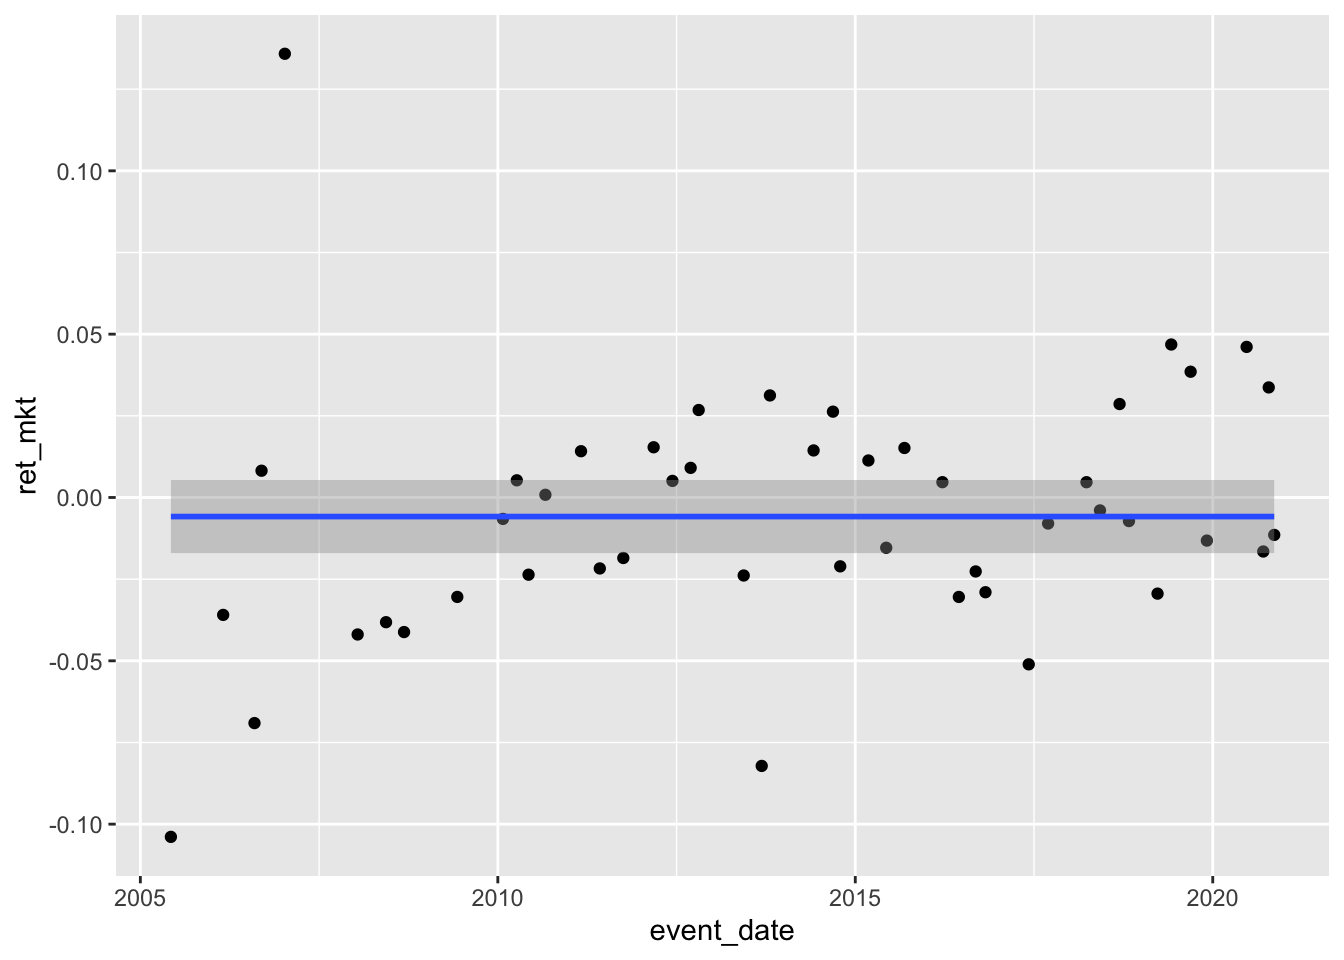 Plot of cumulative returns for Apple stock around periods involving Apple media events against the dates of those events. The mean of these returns is depicted as a horizontal line that is just below the x-axis.